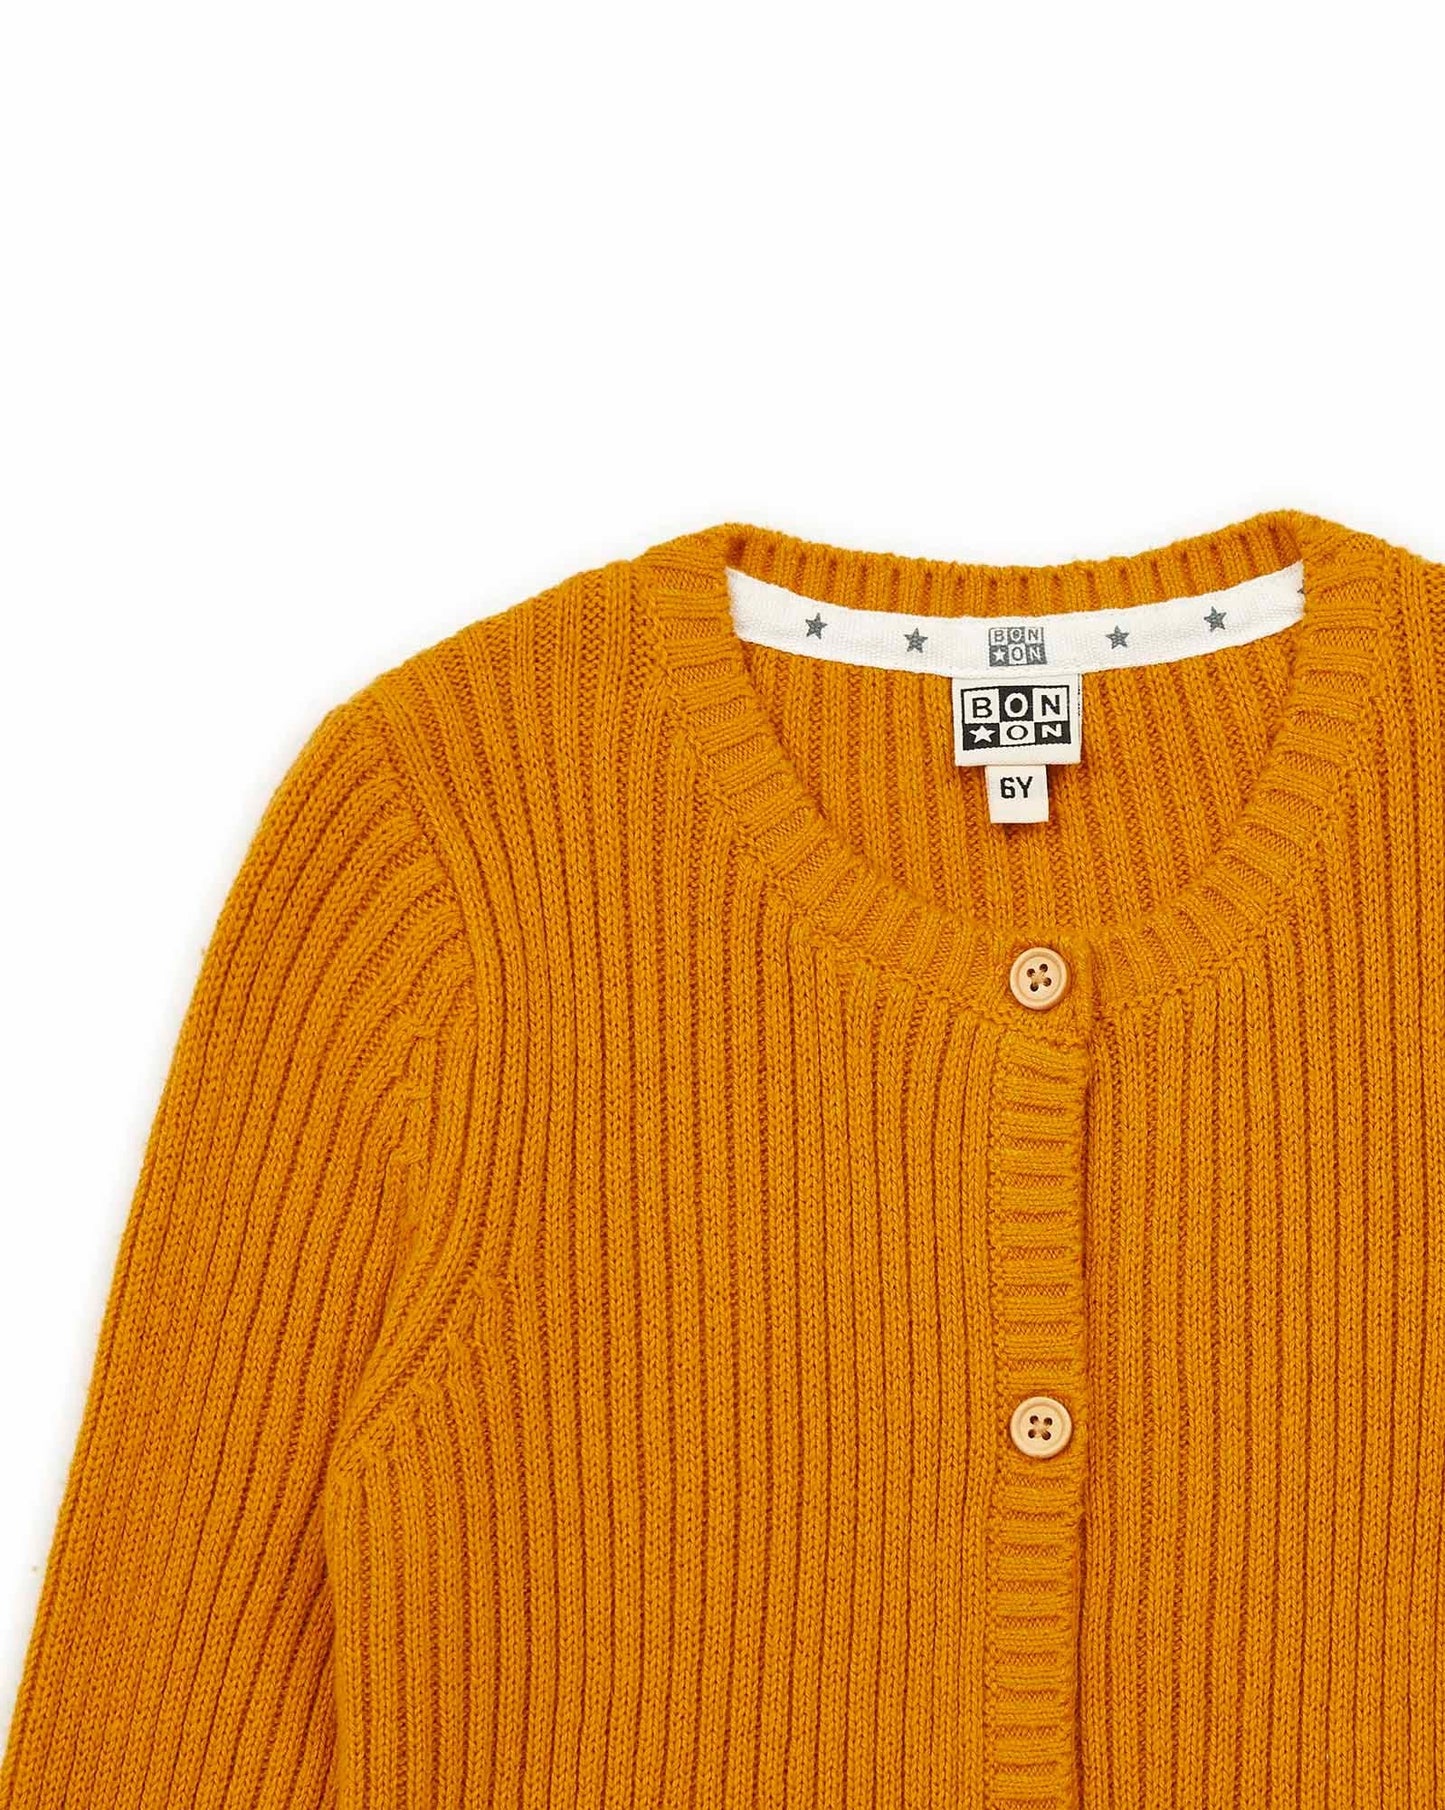 Cardigan sheep Yellow in a knit